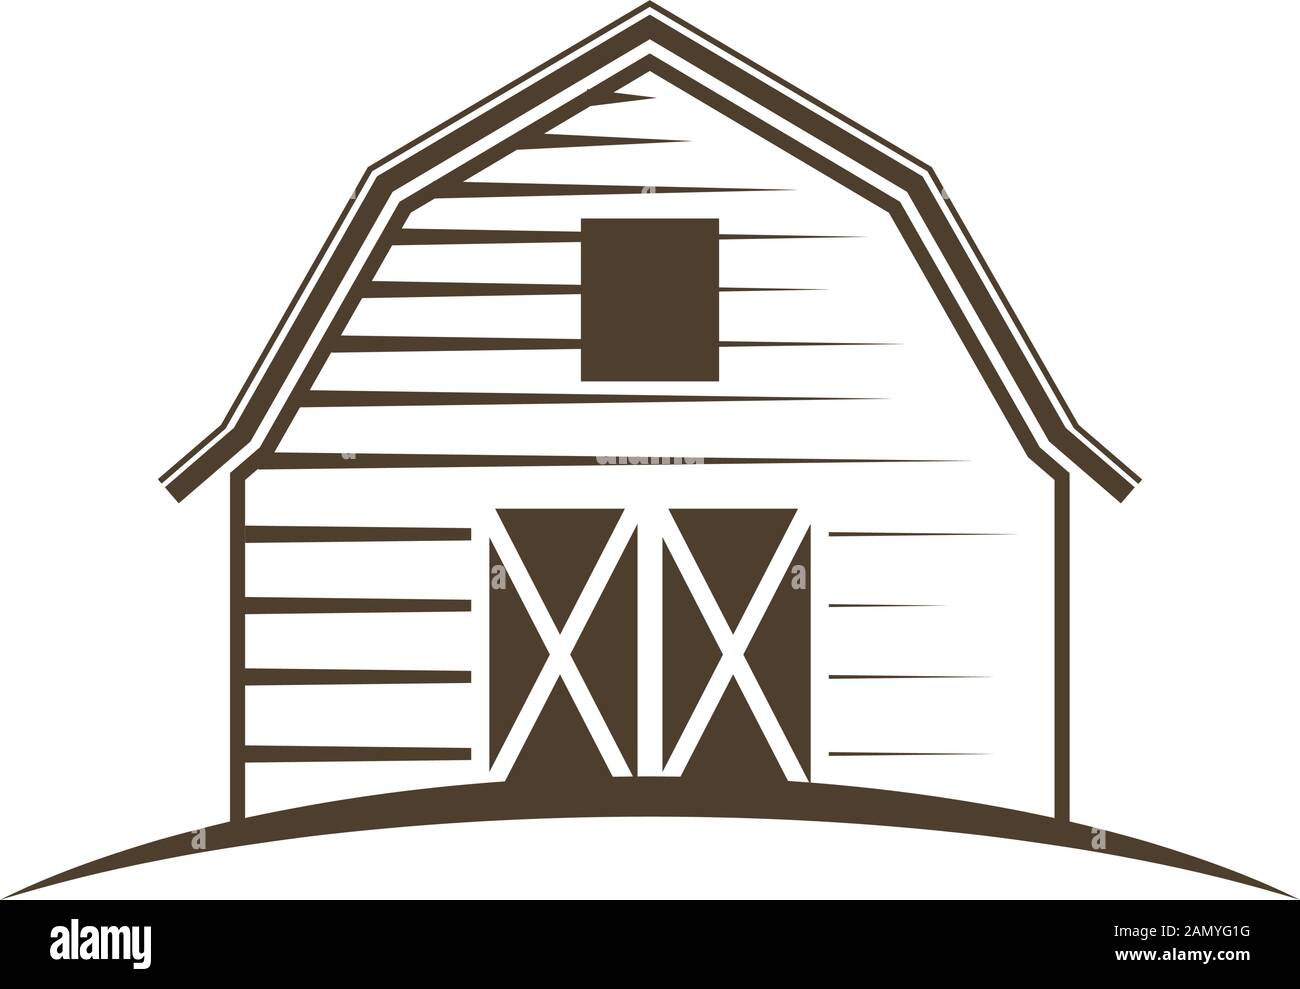 barn, agriculture related vector graphic design element Stock Vector